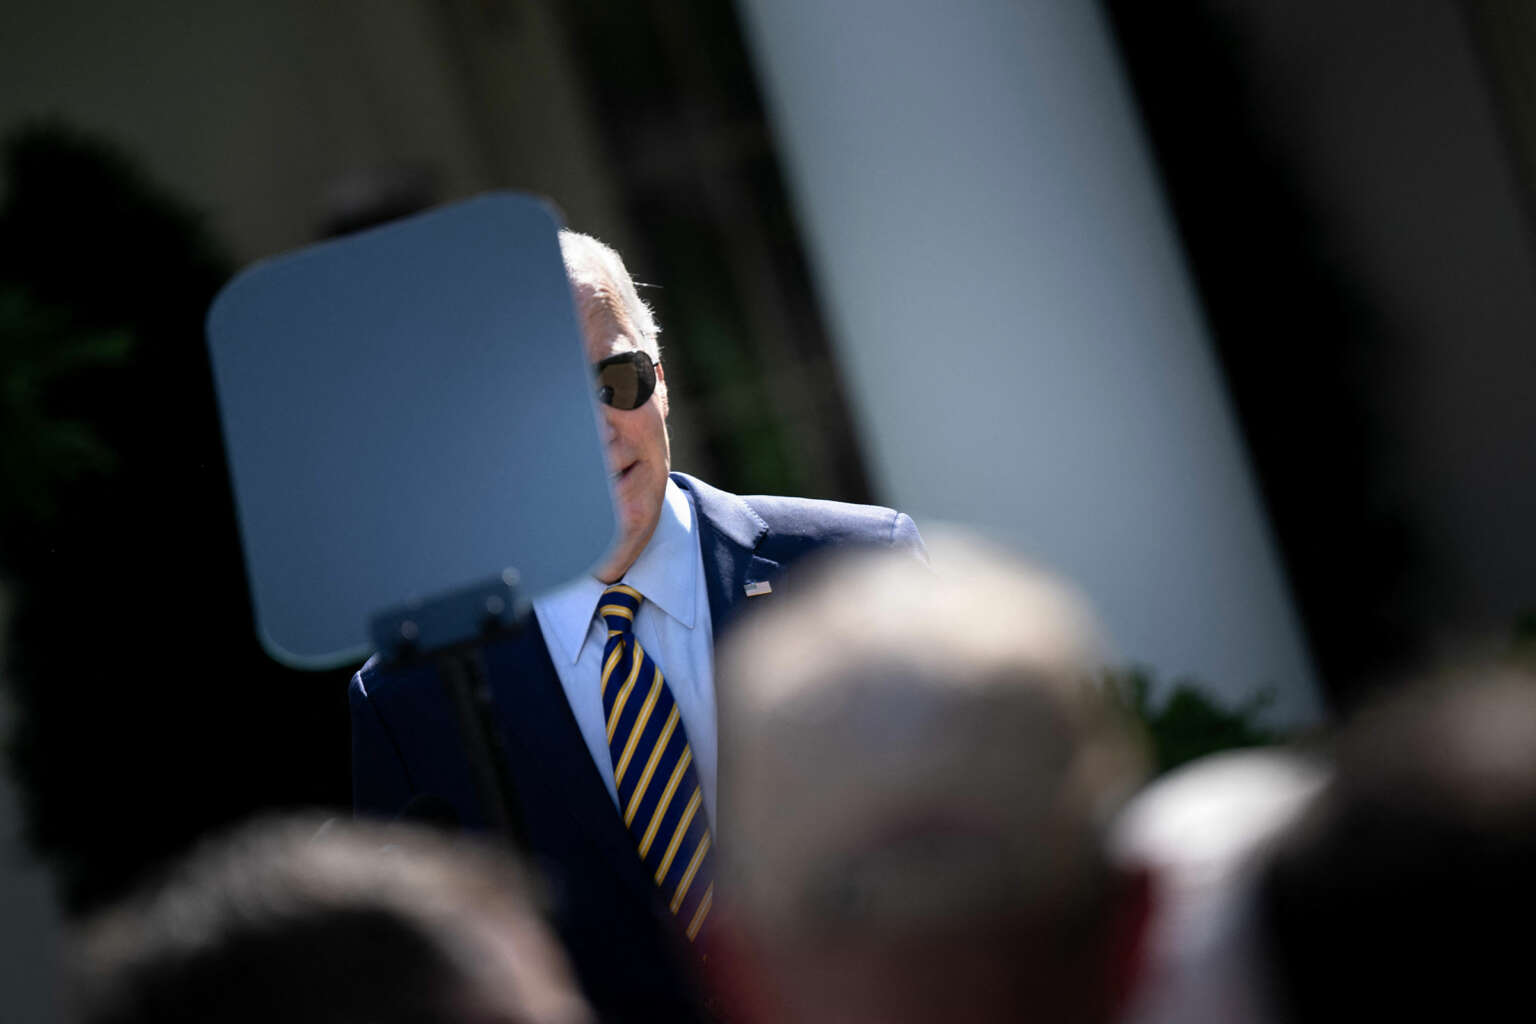 President Joe Biden announces plans to curb planet-warming emissions from the nation's power stations, as part of the efforts to combat climate change, in the Rose Garden of the White House in Washington, D.C., on May 11, 2023.